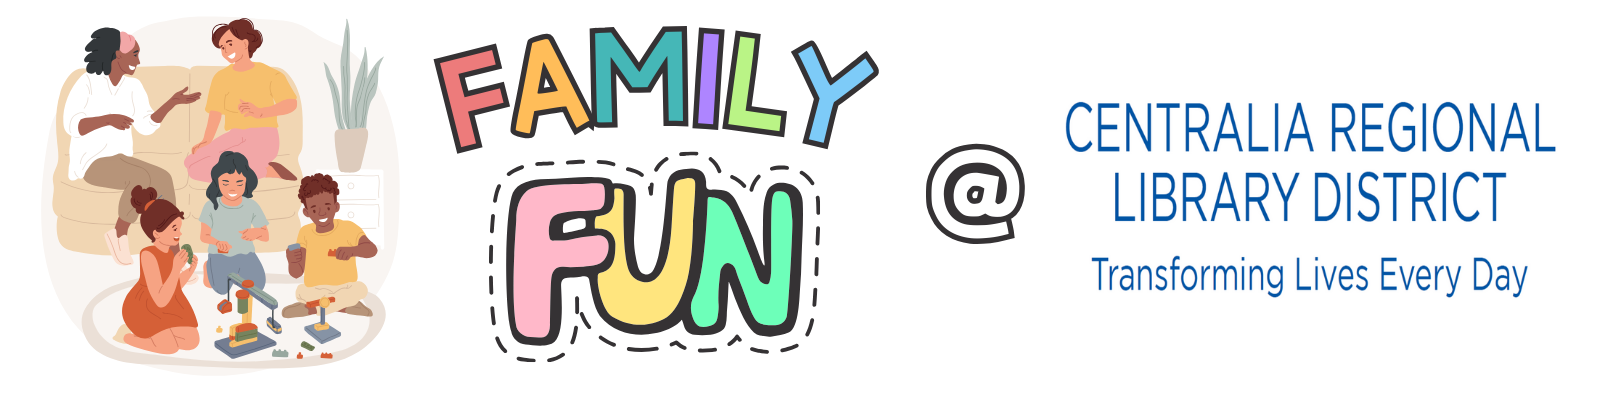 A banner for Family Fun night at Centralia Regional Library. Click for more details.